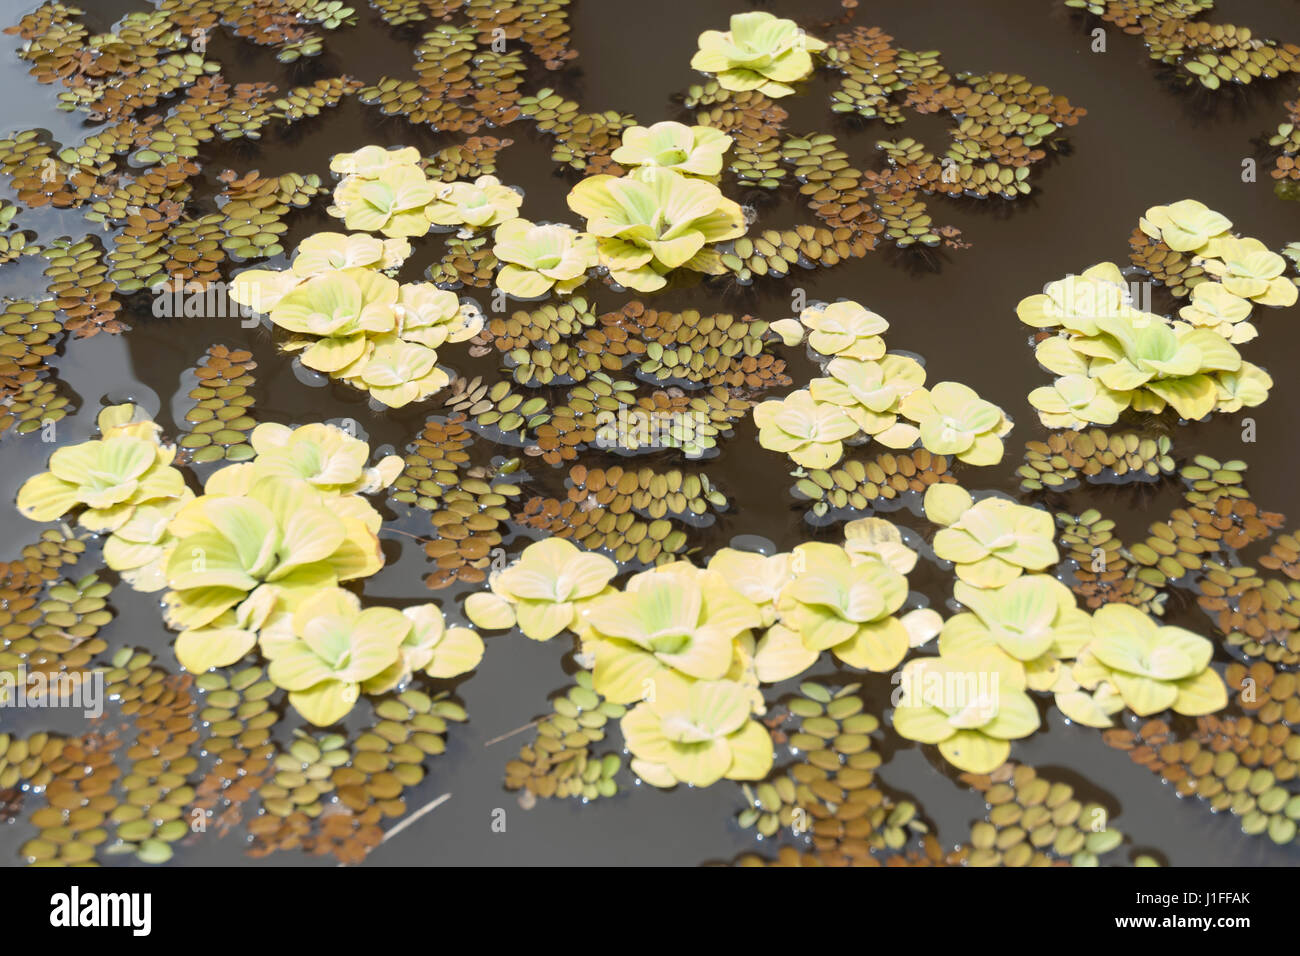 Yellowish water lettuce or water cabagge (Pistia stratiotes) floating in a pond Stock Photo